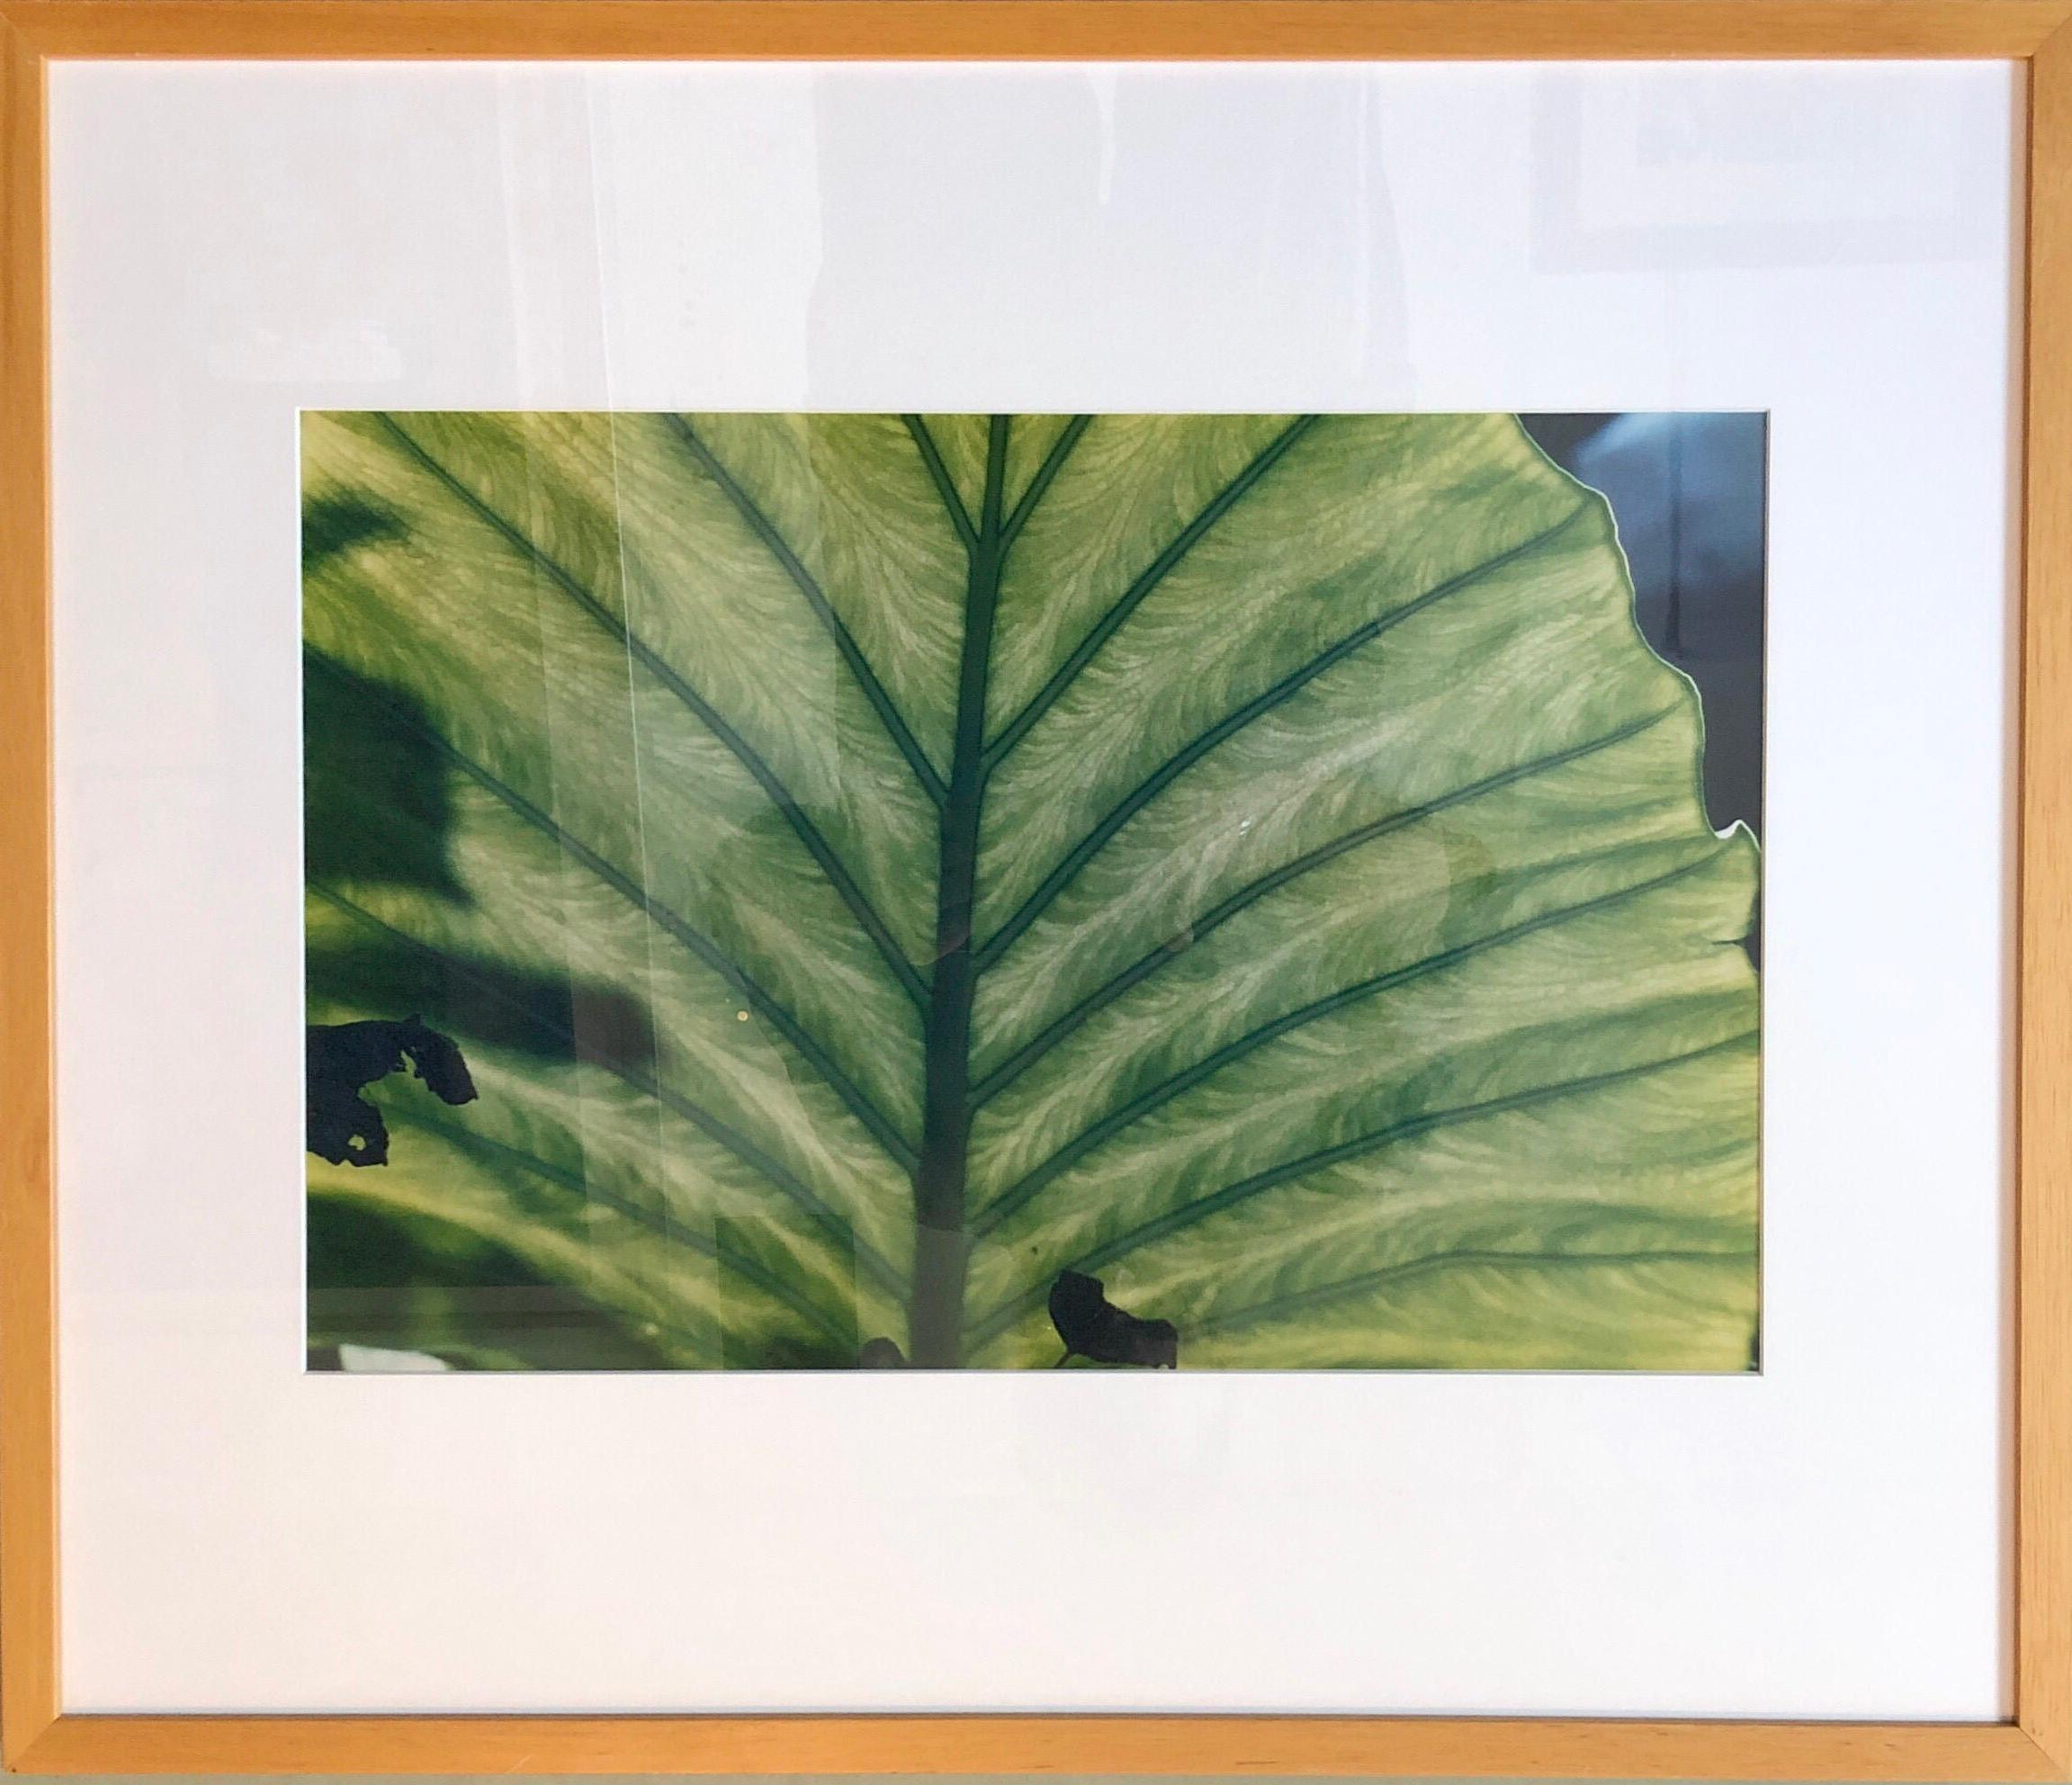 Evelyn Lauder limited edition photograph.  
Titled: Luminous Leaf. Depicts a close up  picture of a semi translucent leaf with light  shining through. Measures 16" x 20". No signature on front but I believe they are signed verso. Not inspected out